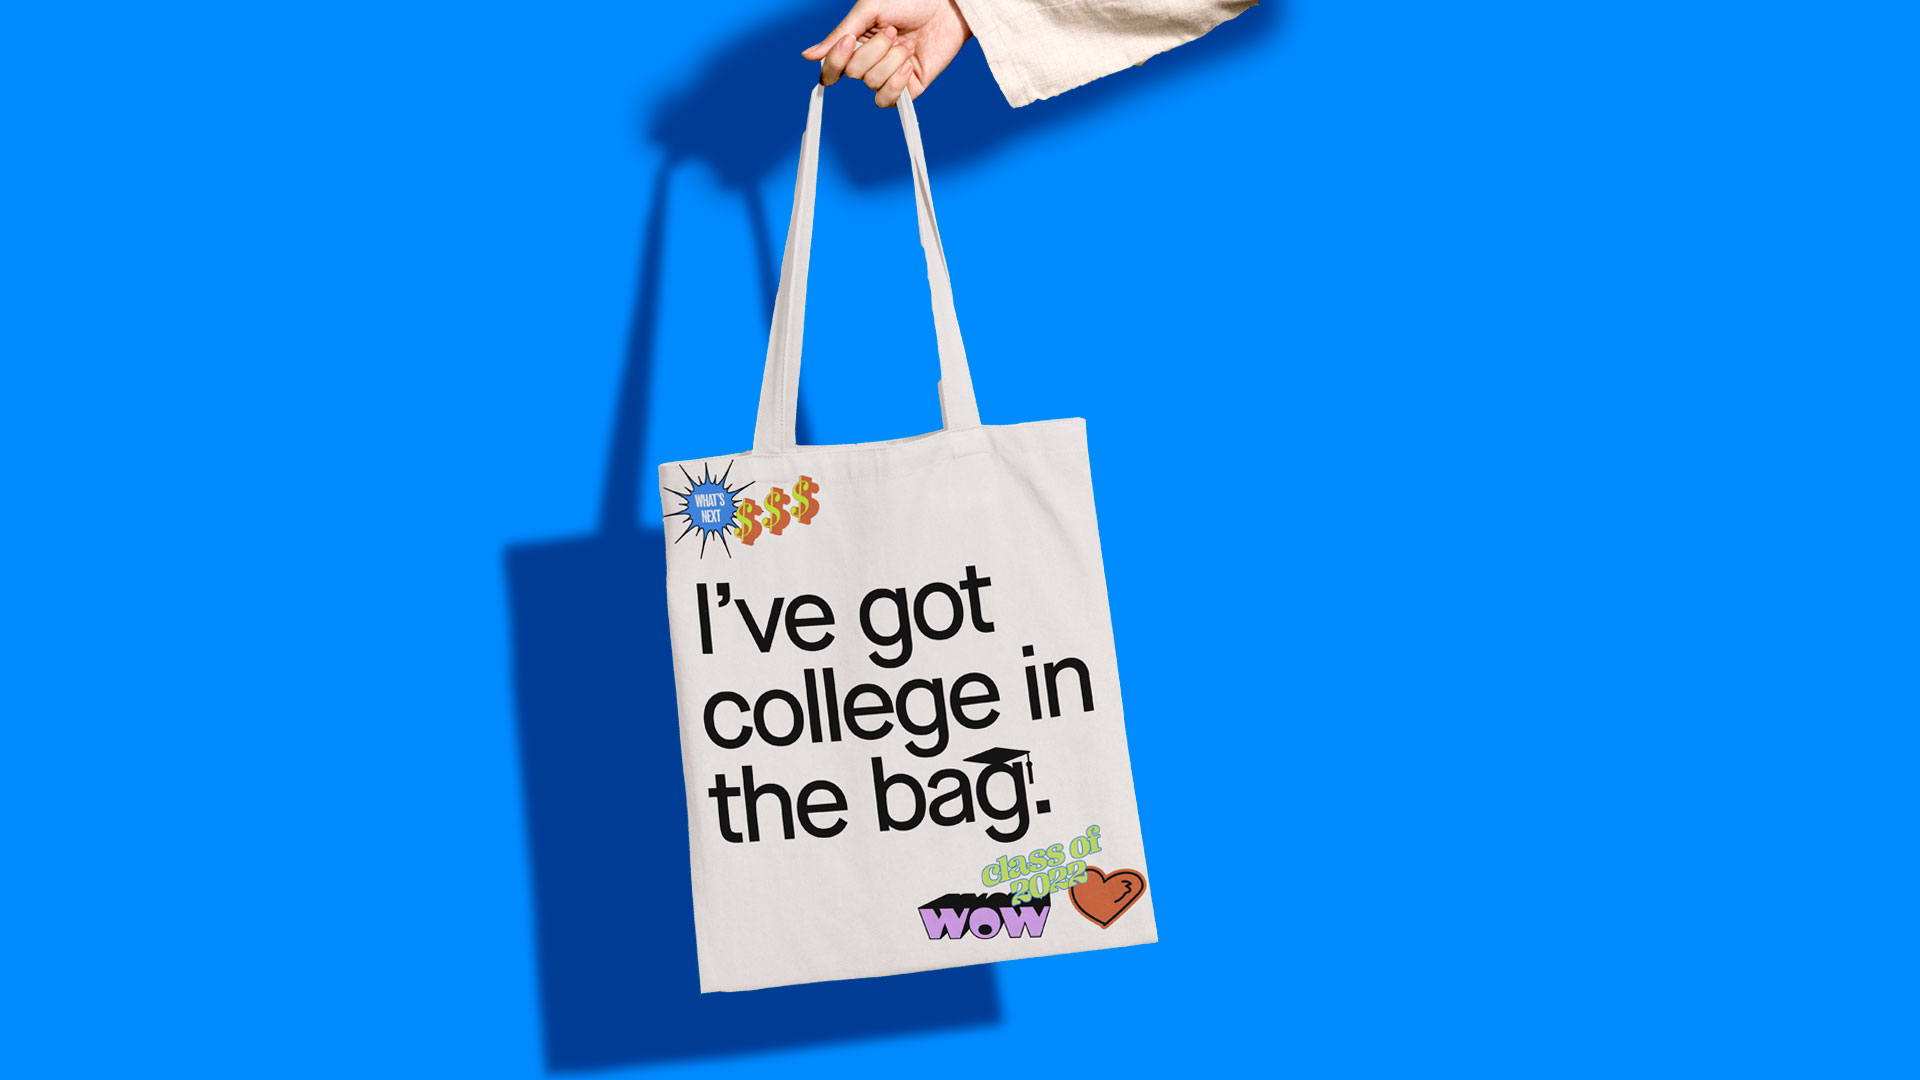 A hand holding a school me tote bag